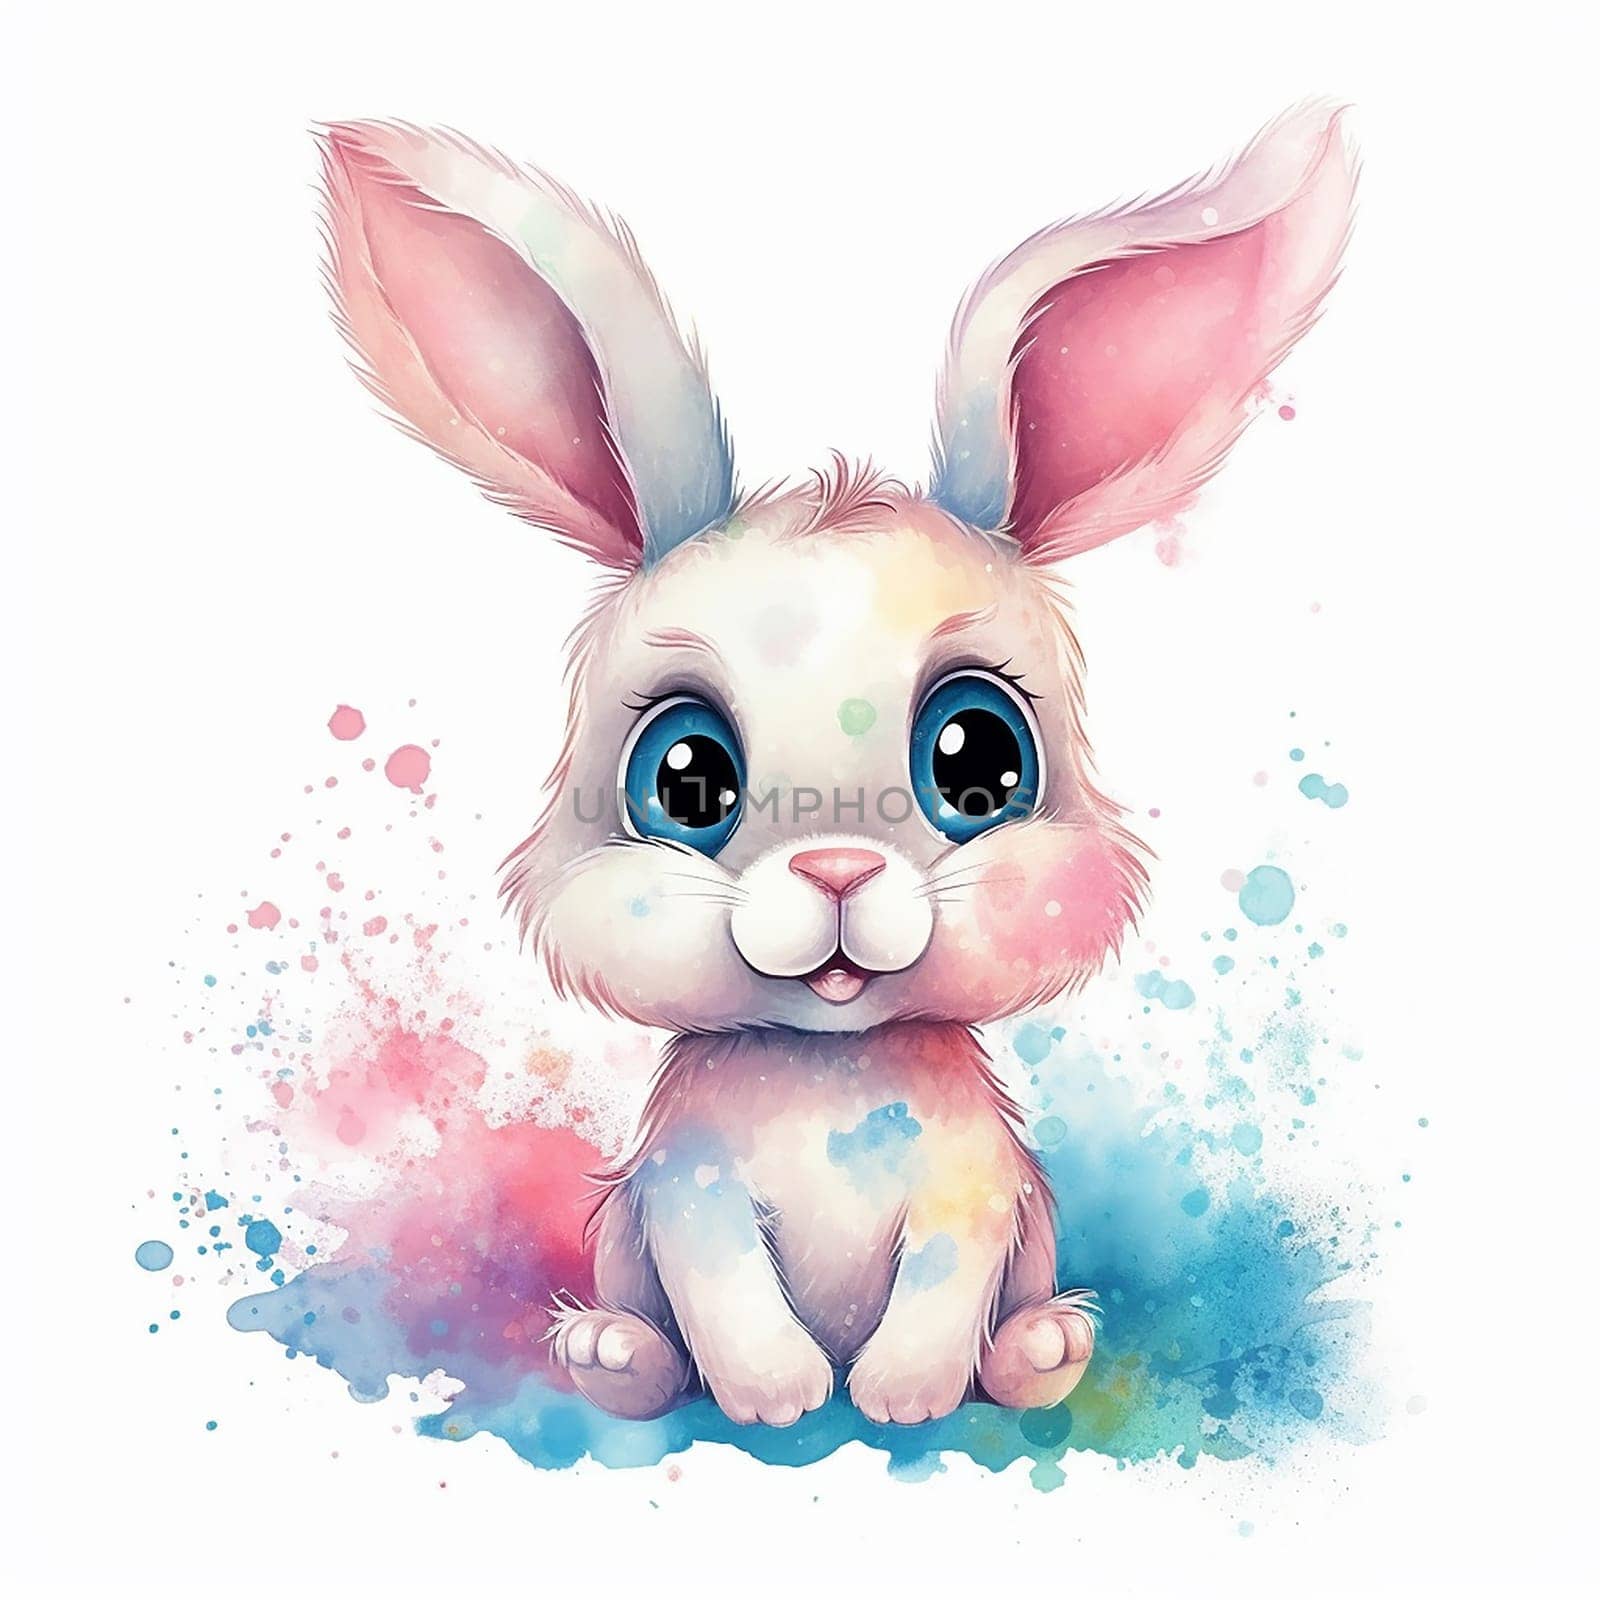 A little cute and adorable small rabbit, baby bunny photo, family pet, watercolor style by Hype2art